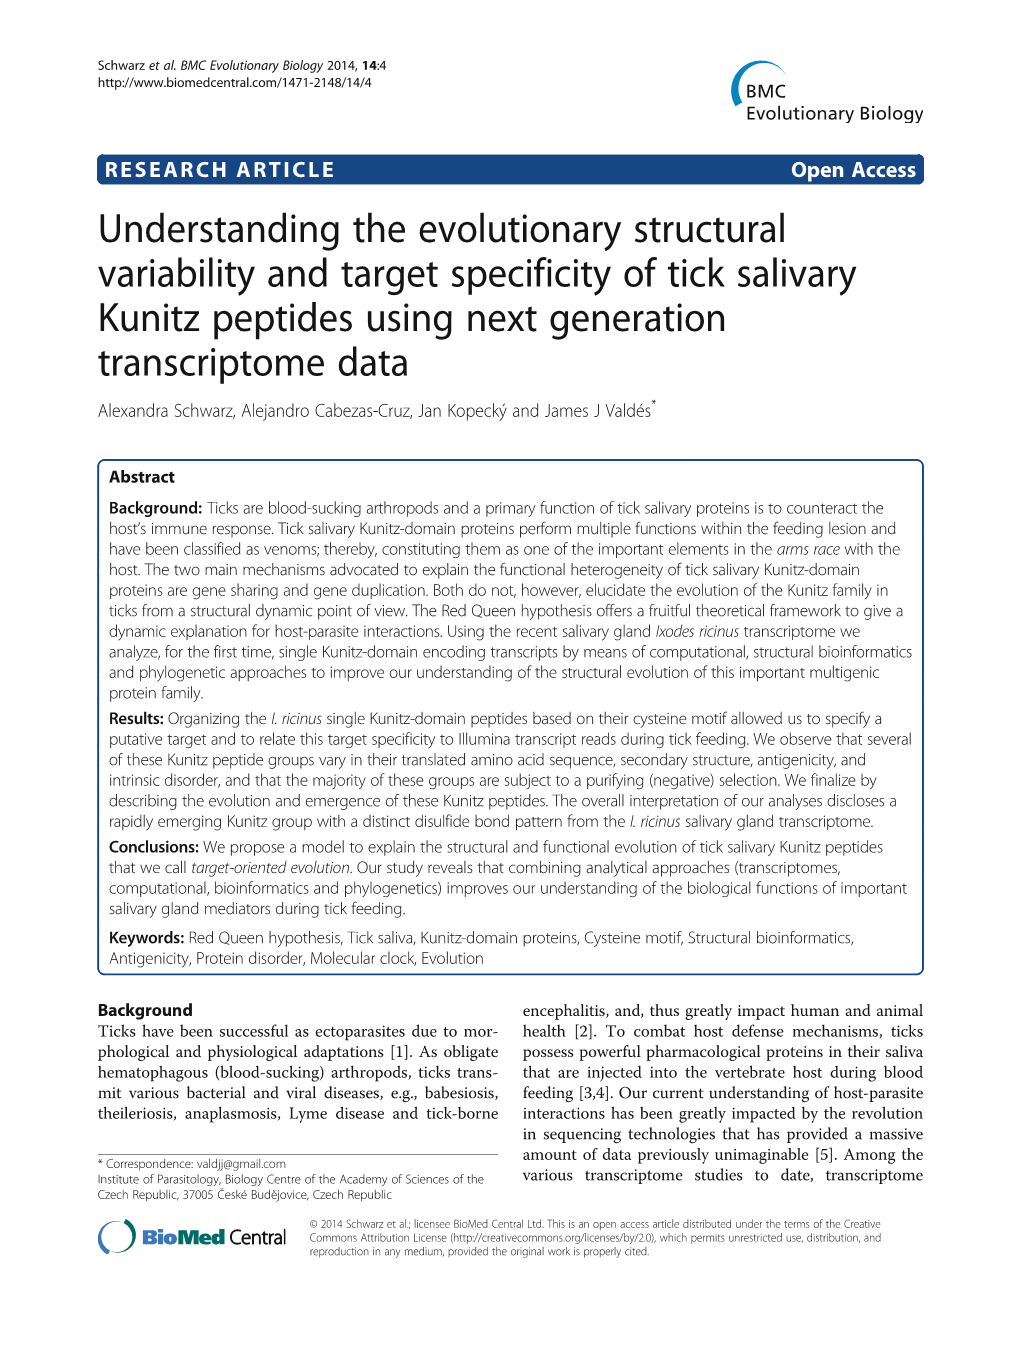 Understanding the Evolutionary Structural Variability